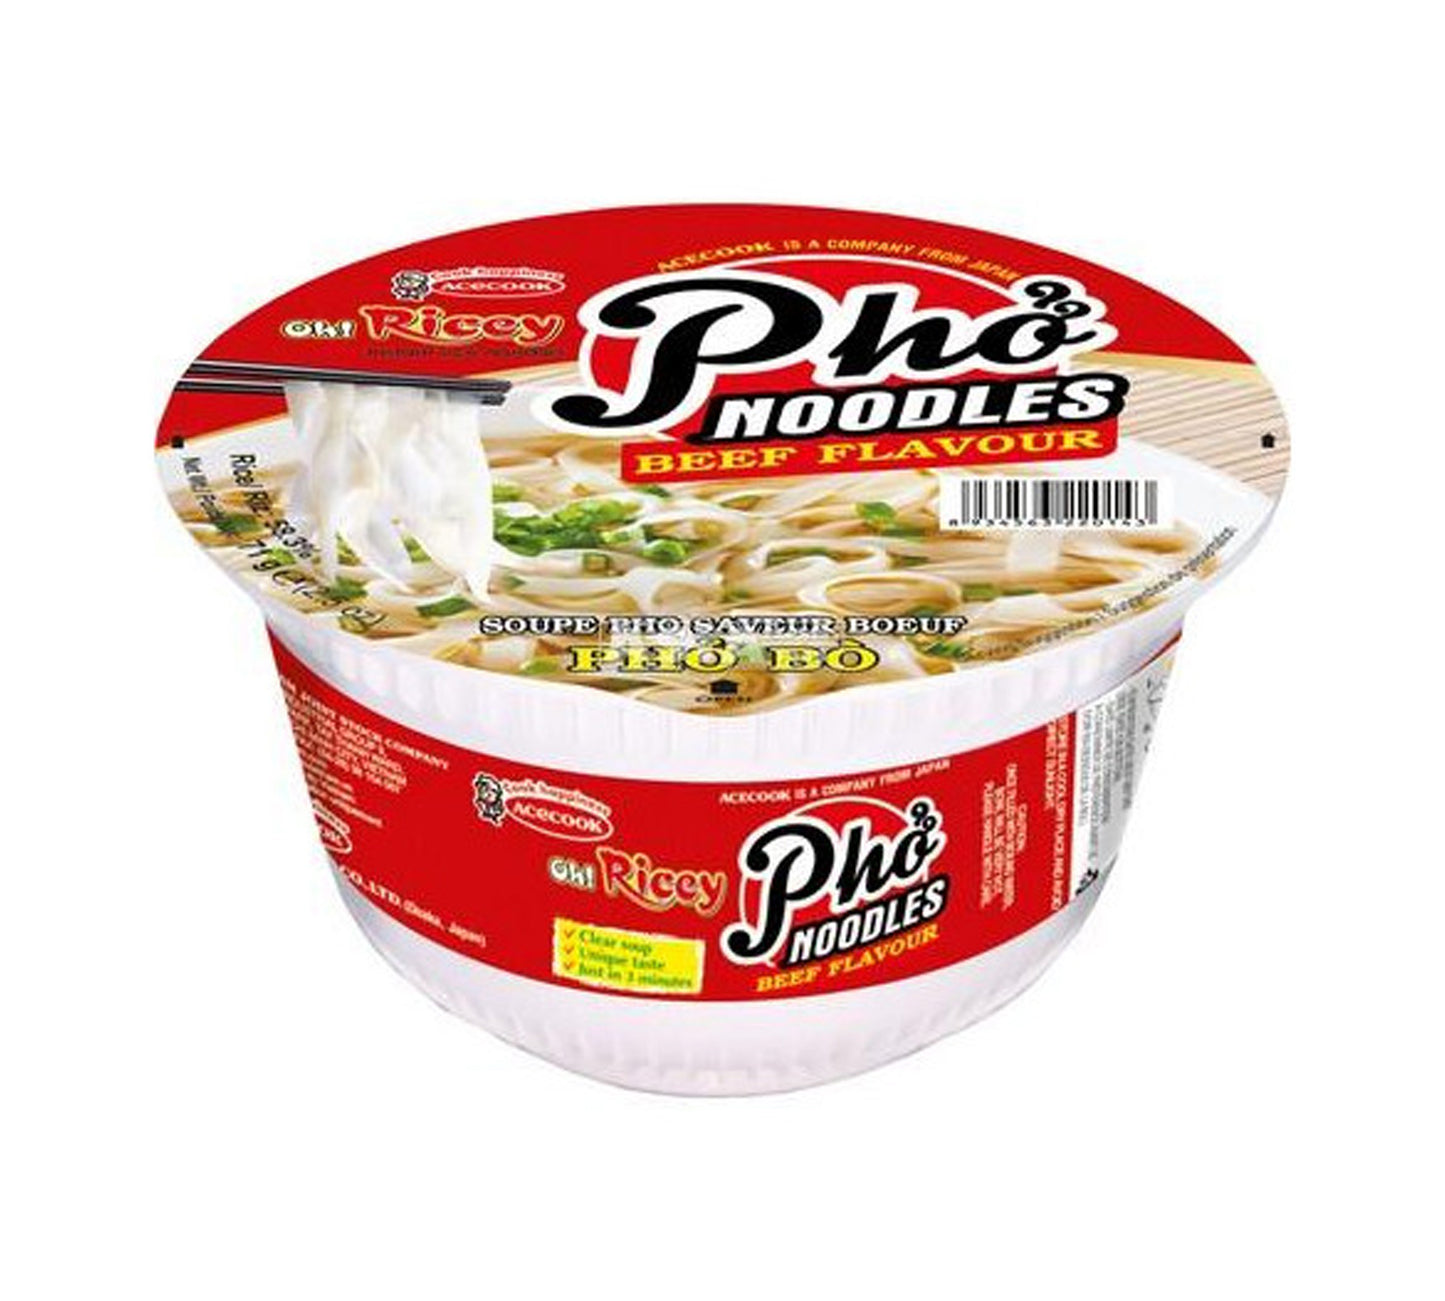 Acecook Oh Ricey Pho Noodles Beef Flavour Bowl (71 gr)